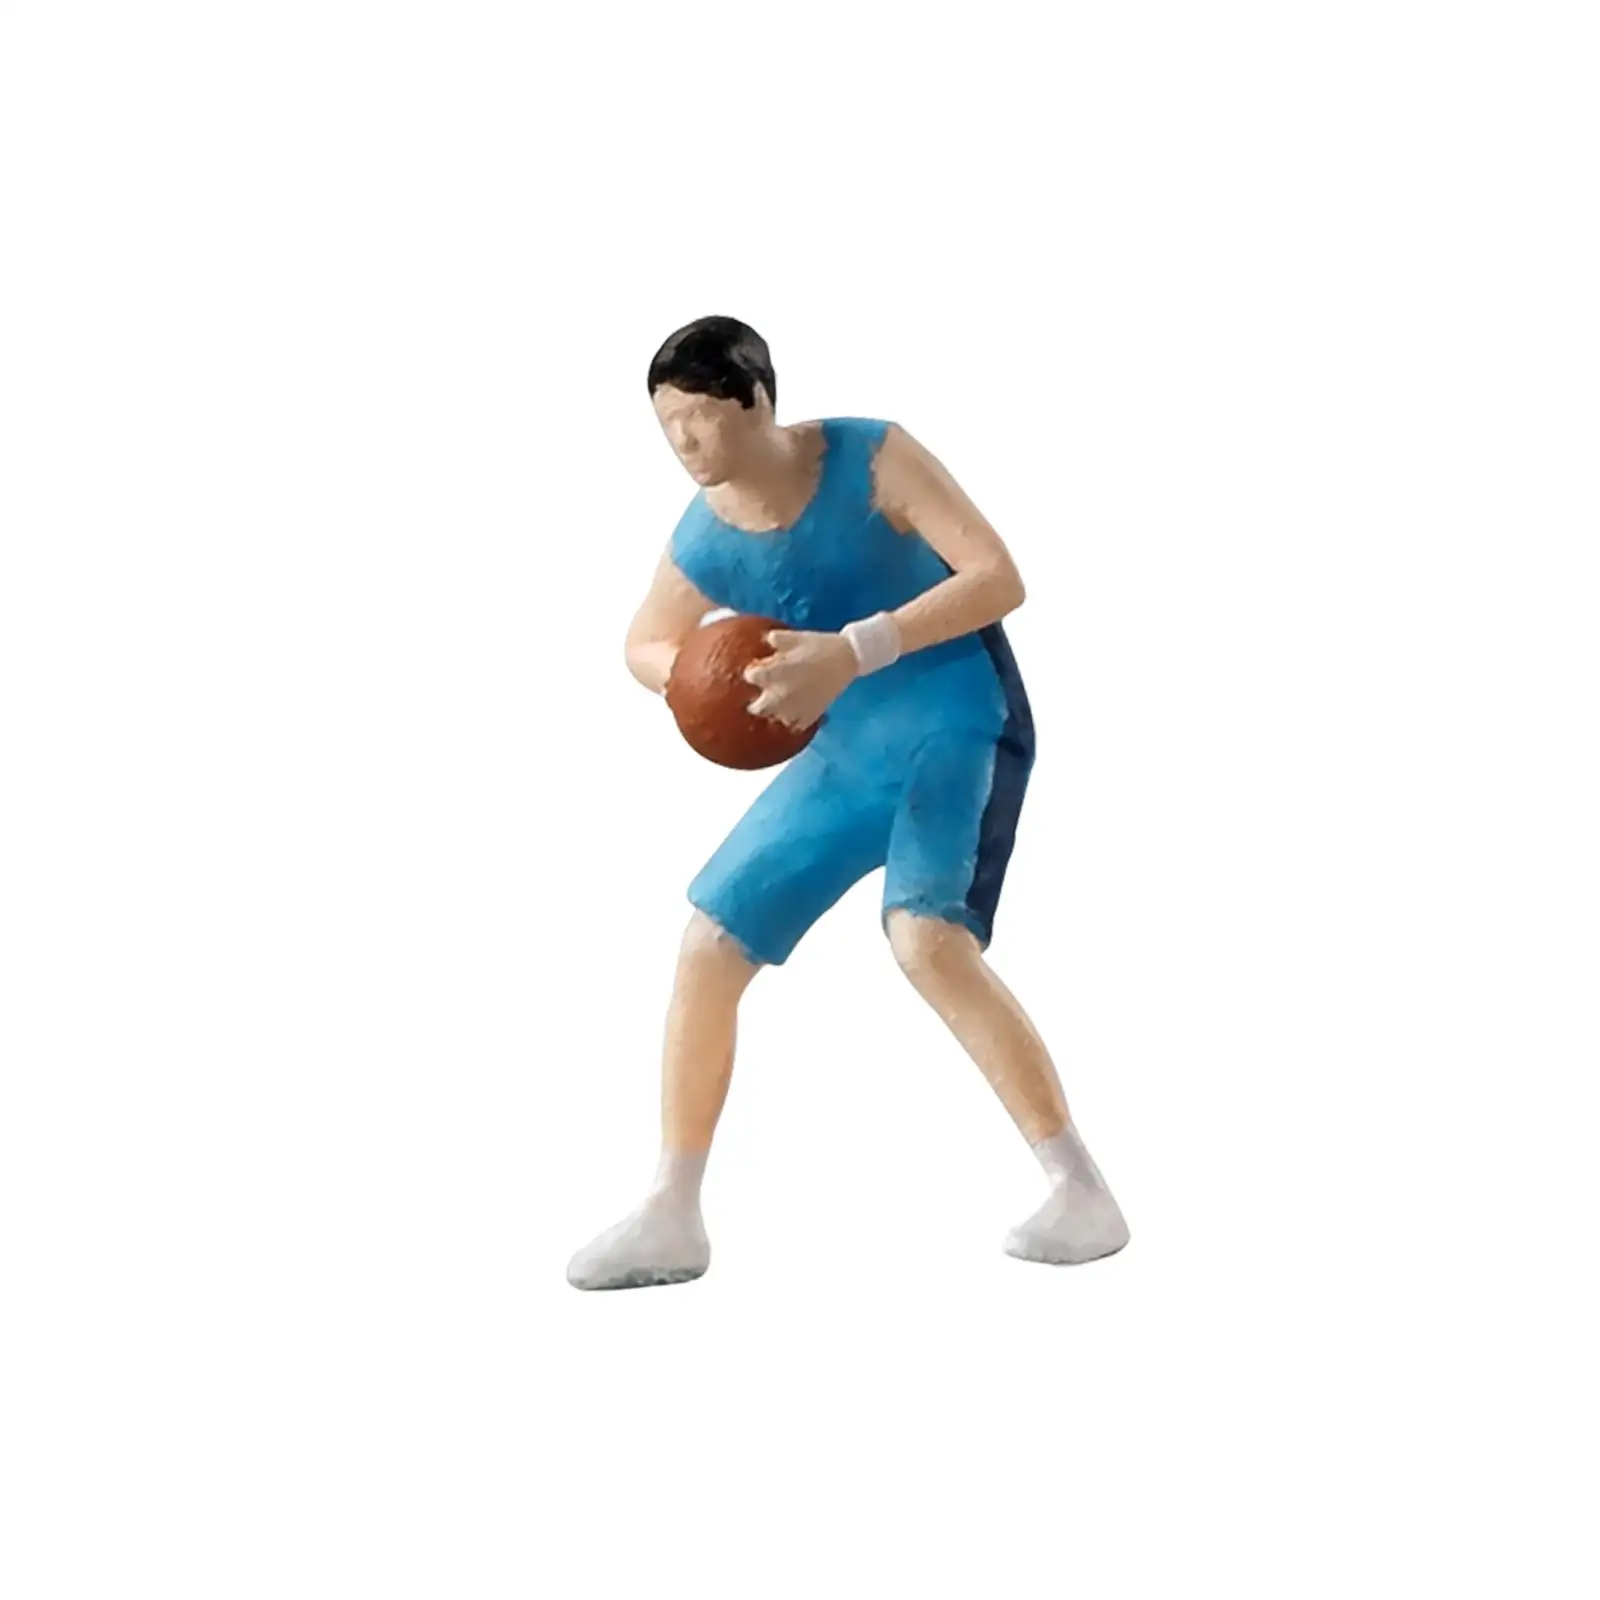 1:64 People Figures Sand Table Ornament Crafts Collectibles Basketball Boy Figures for Dollhouse Diorama DIY Scene Ornament